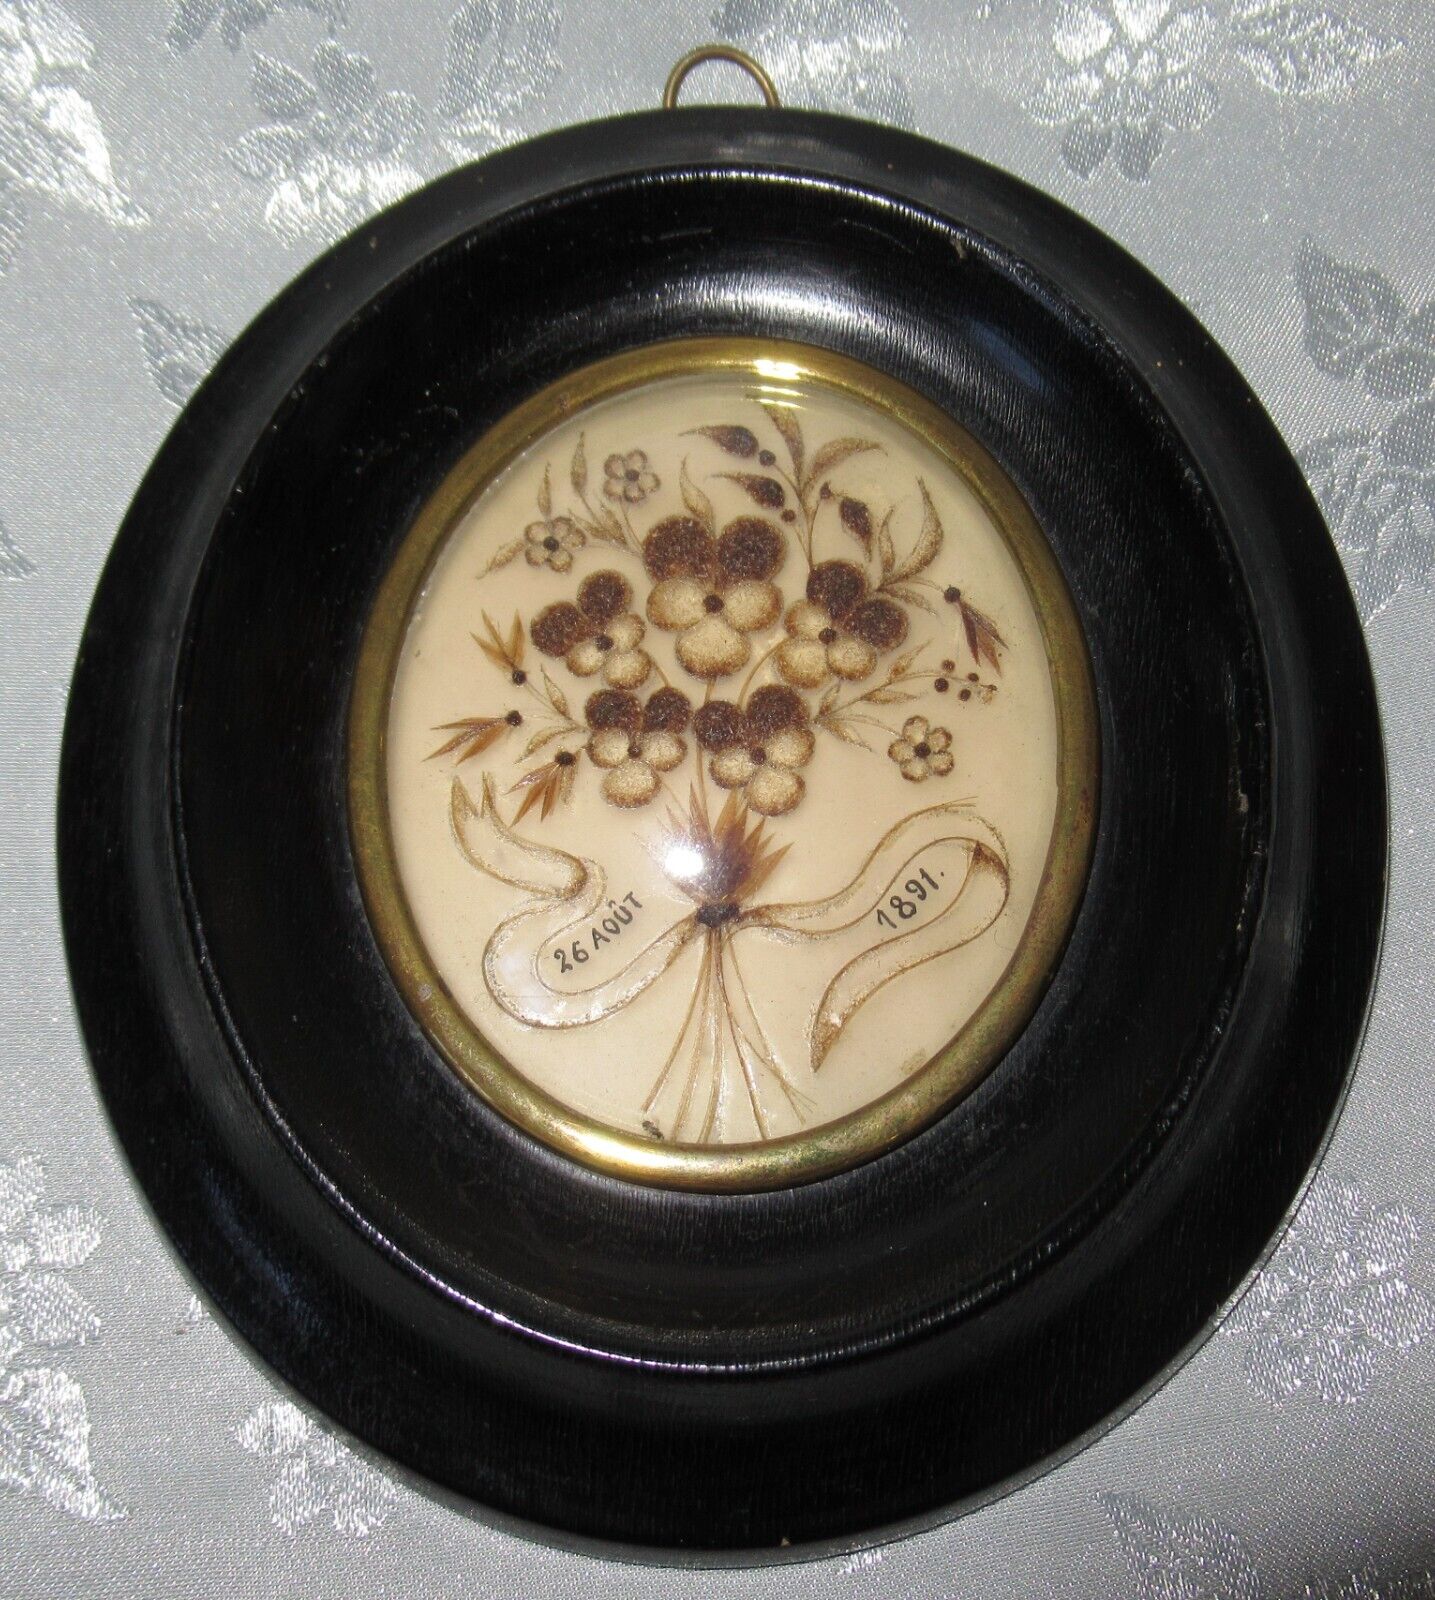 ANTIQUE FRENCH MOURNING HAIR ART CONVEX GLASS FRAME RELIQUARY DATED 26 AOUT 1891